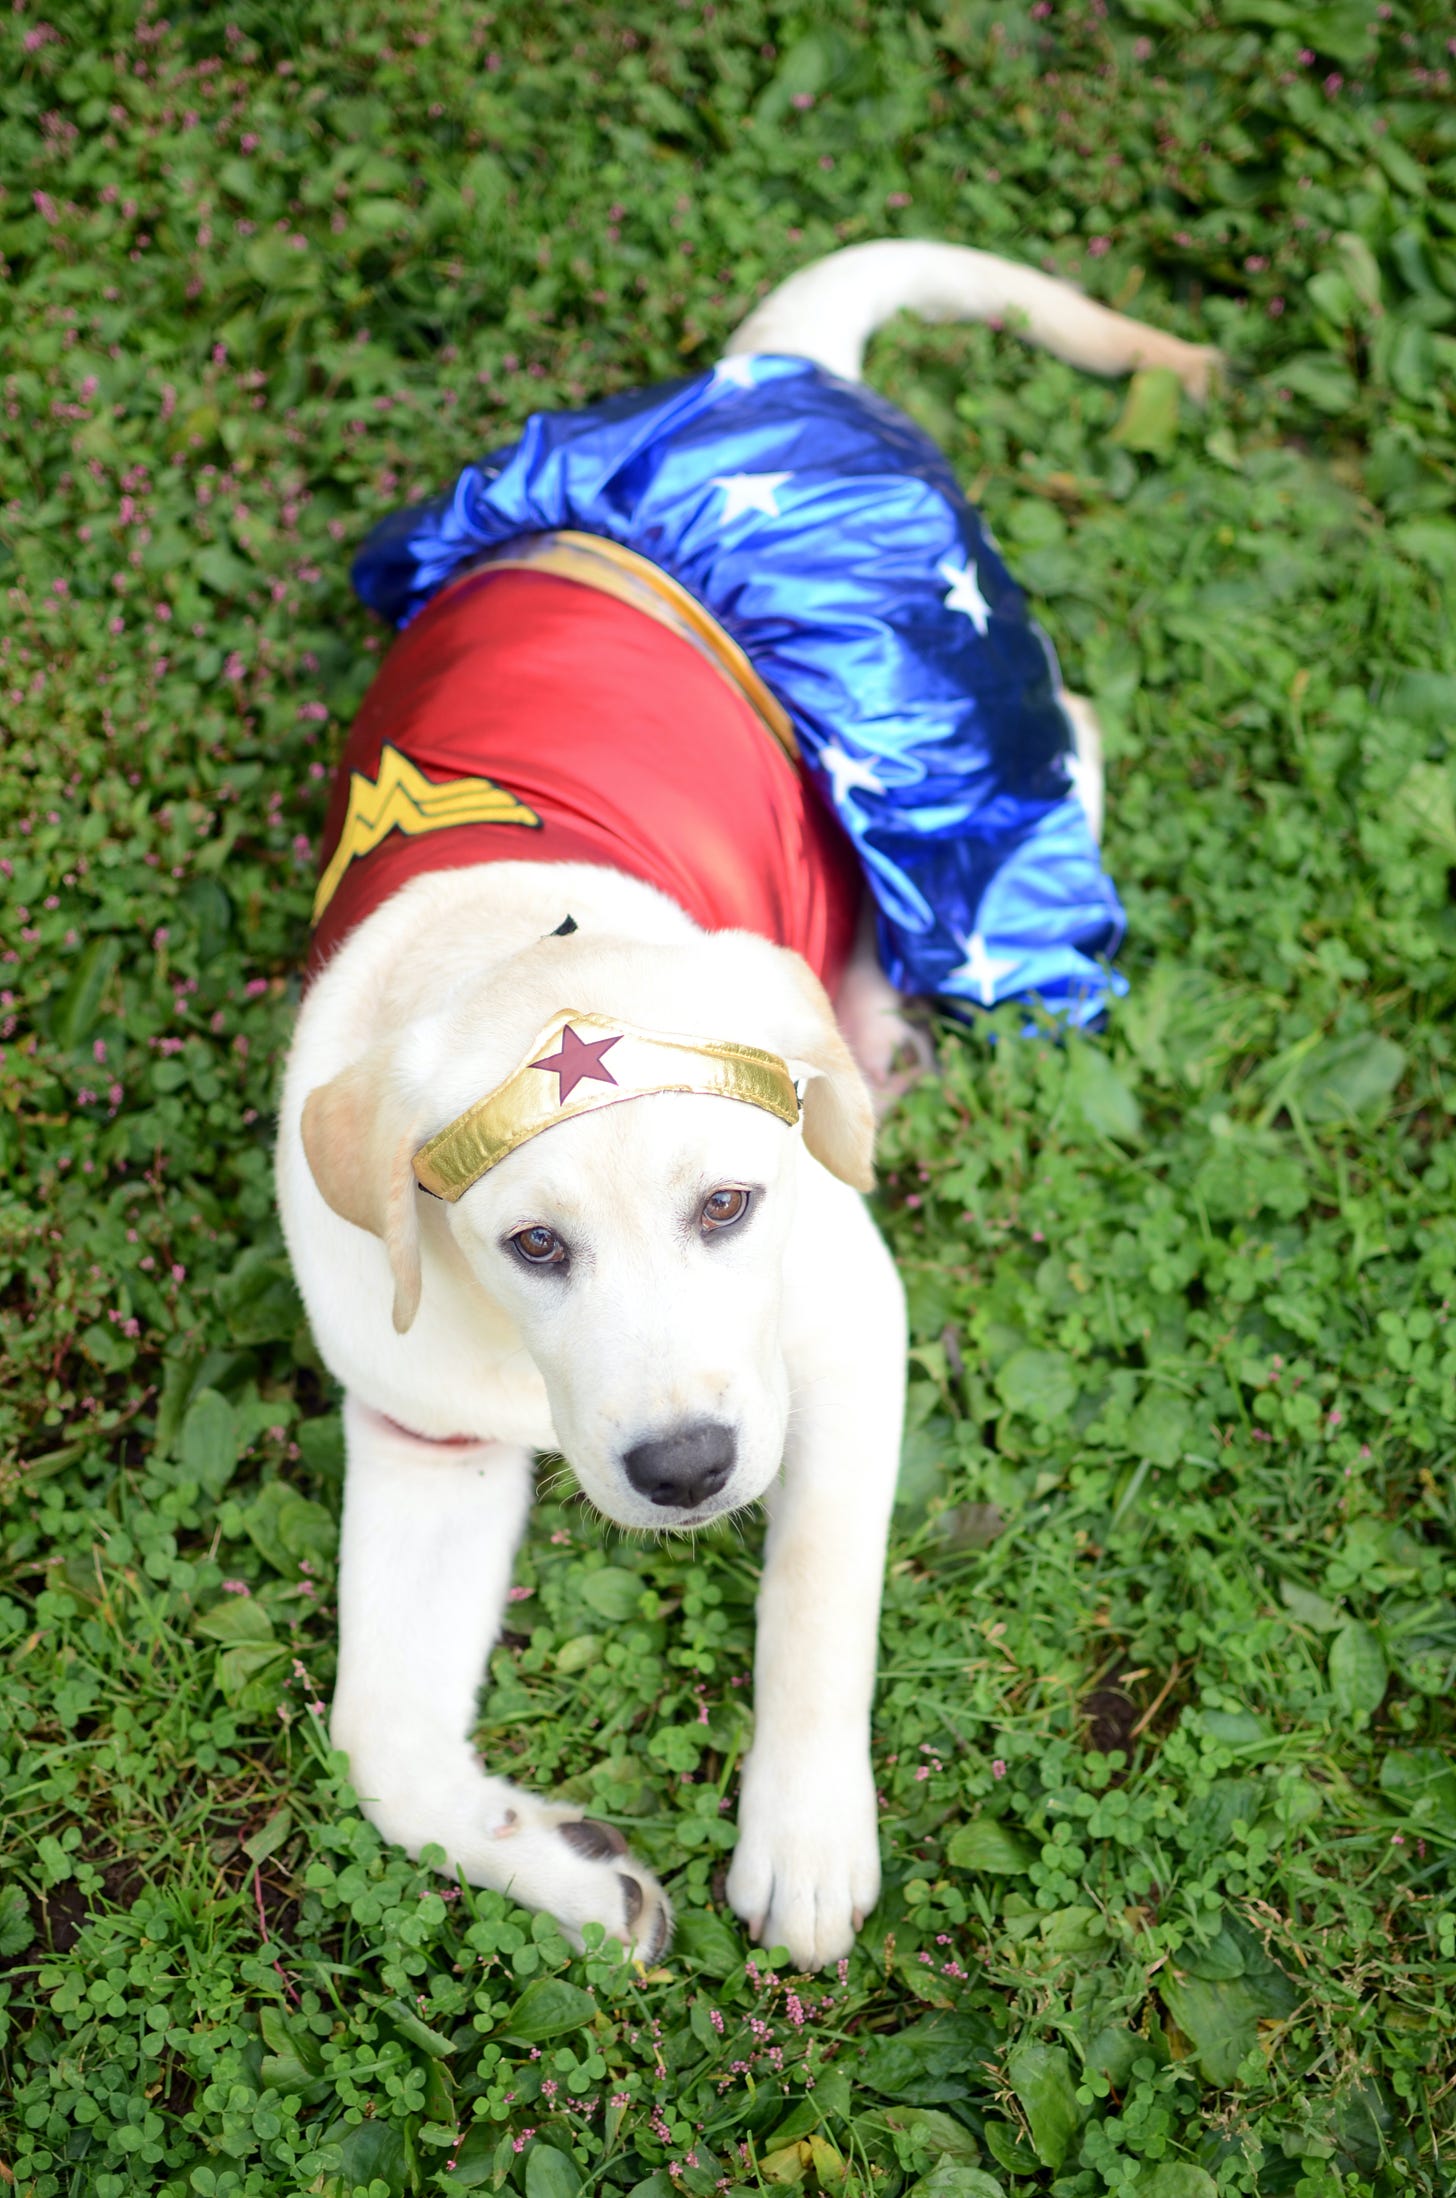 A yellow Labrador retriever puppy in a Wonder Woman costume lays in the grass.